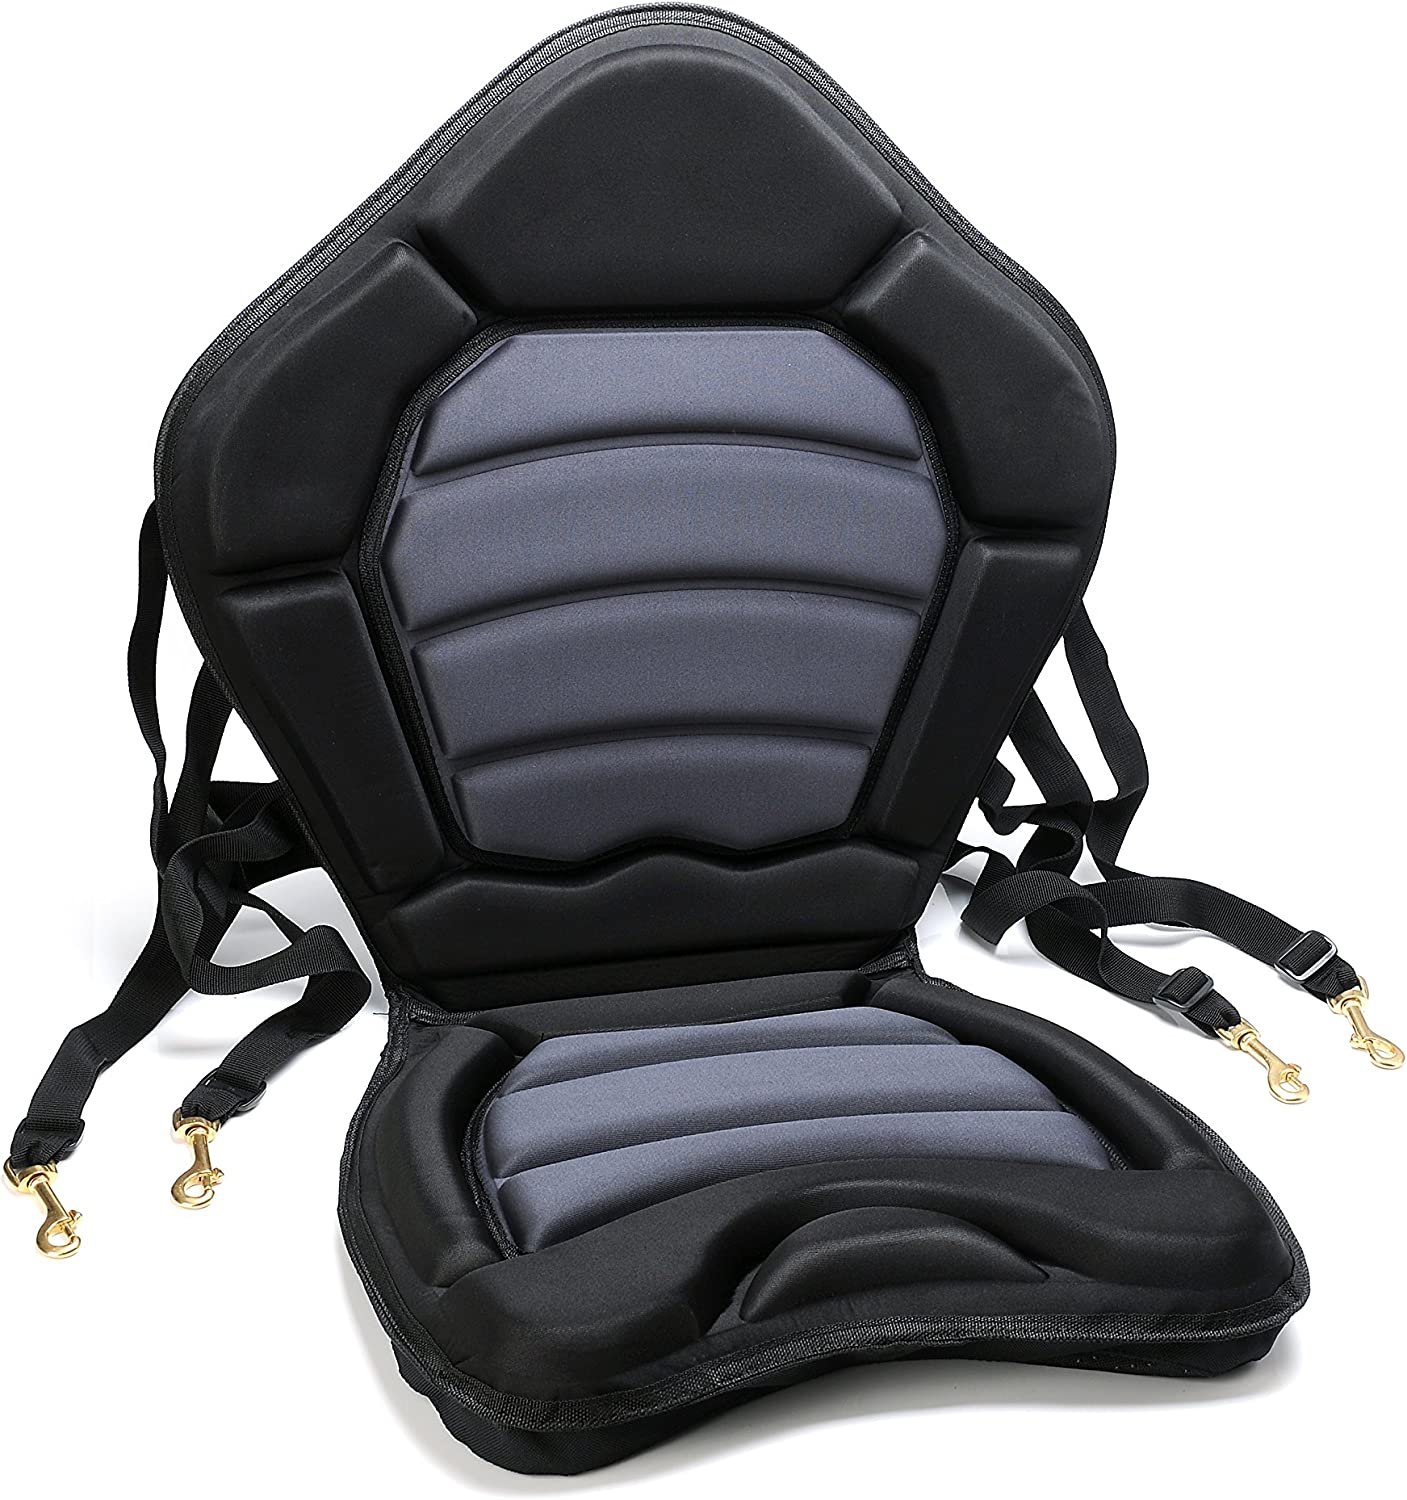 Ultra-Thick-OceanMotion-Ergo-Fit-sit-on-top-Kayak-seat